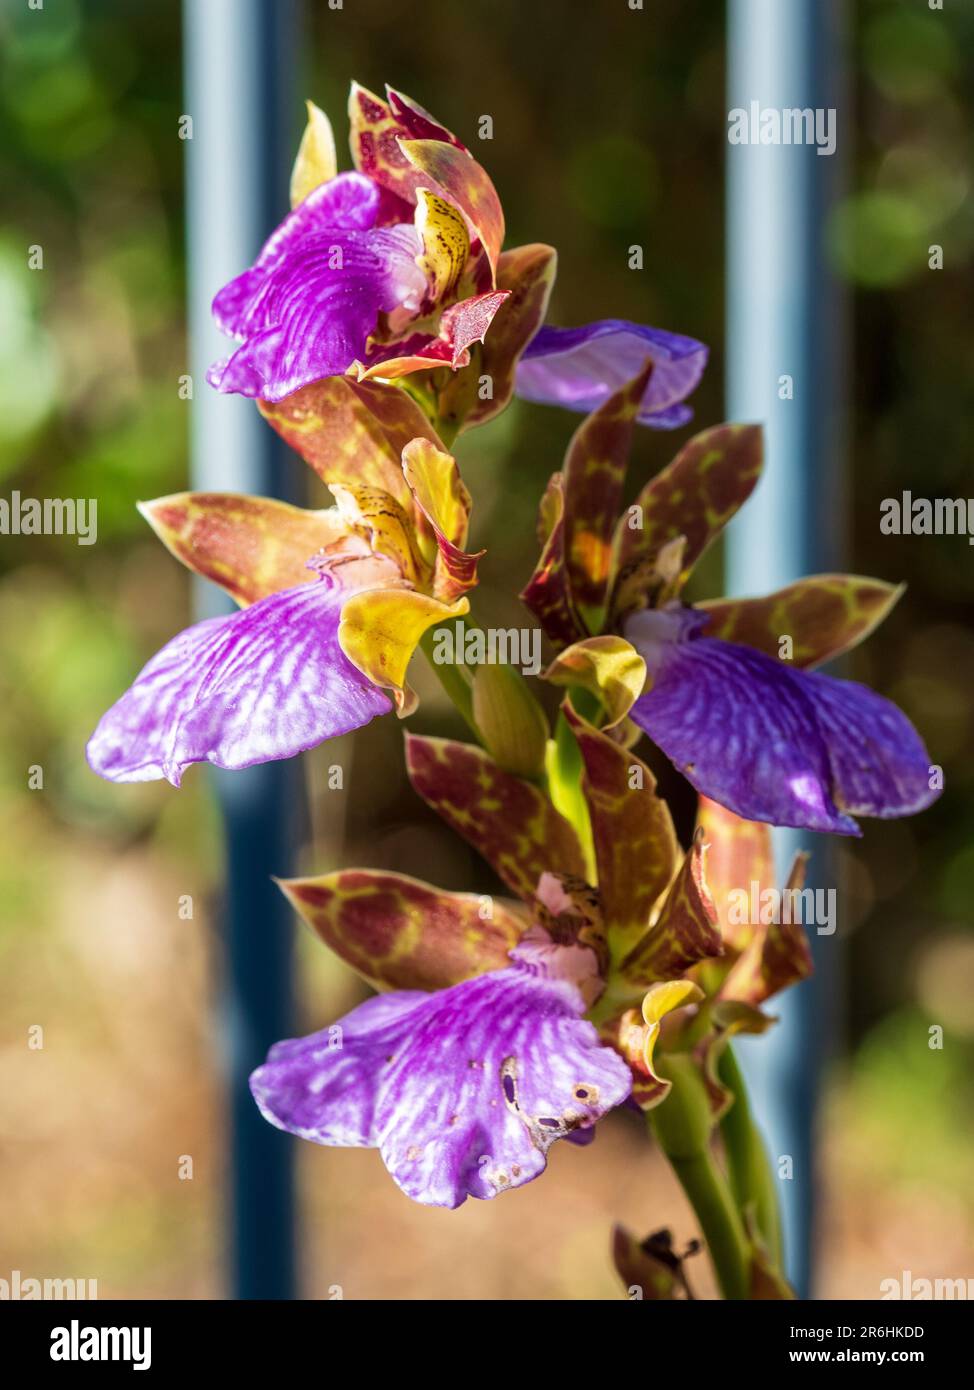 A stem of purple with dark red and yellow patterns Zygopetalum orchid flowers in the morning sunlight, Australian coastal garden Stock Photo